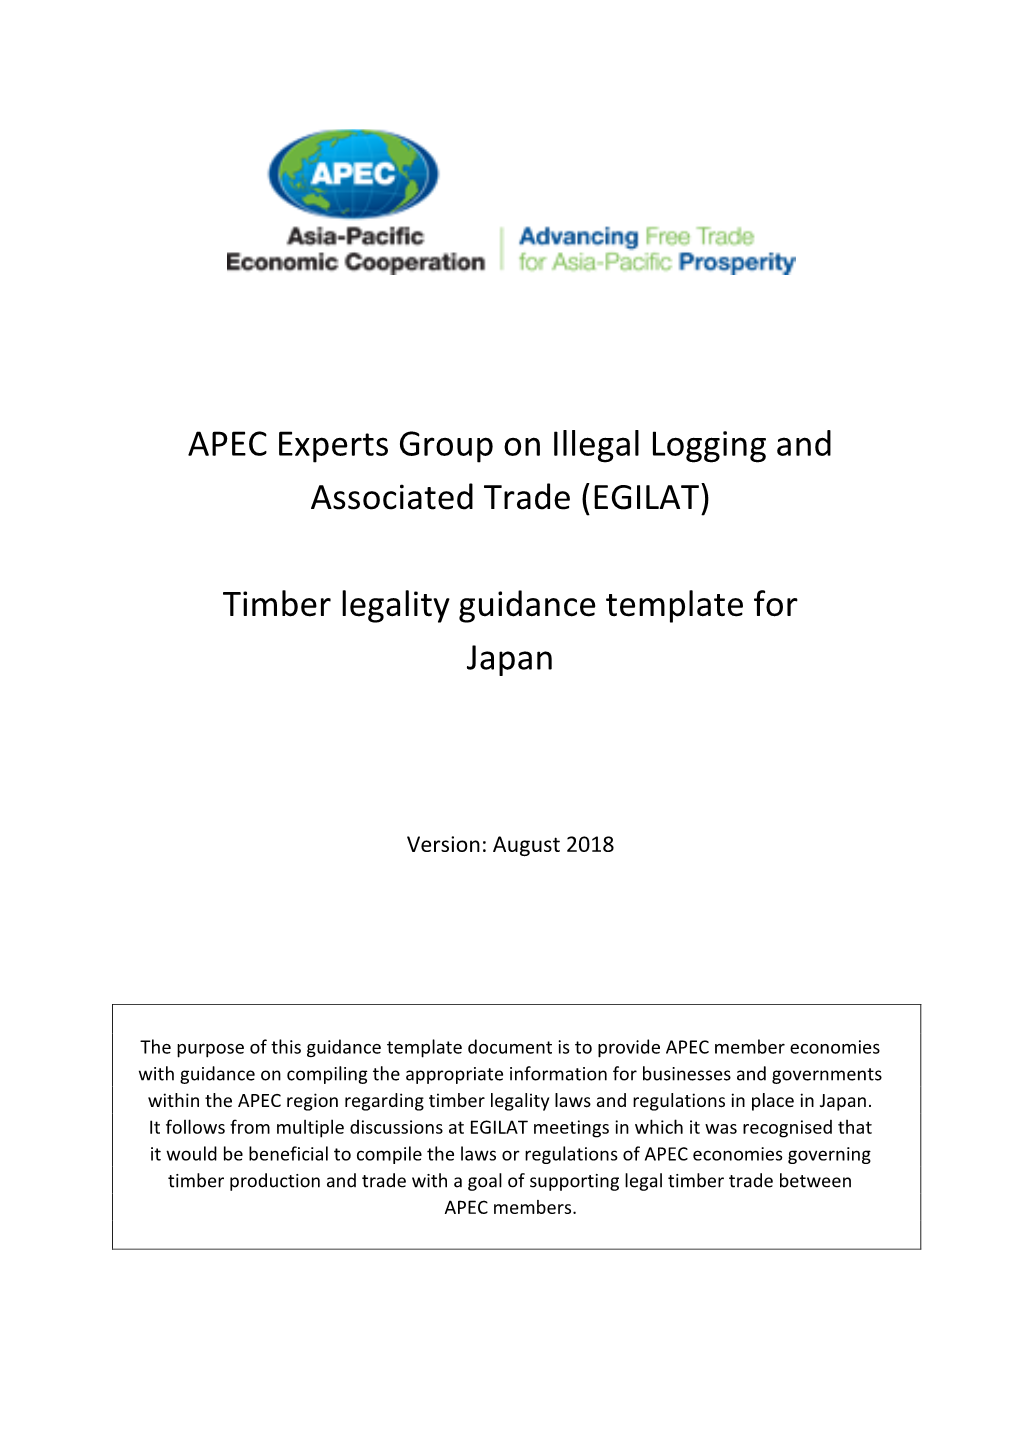 APEC Experts Group on Illegal Logging and Associated Trade (EGILAT)